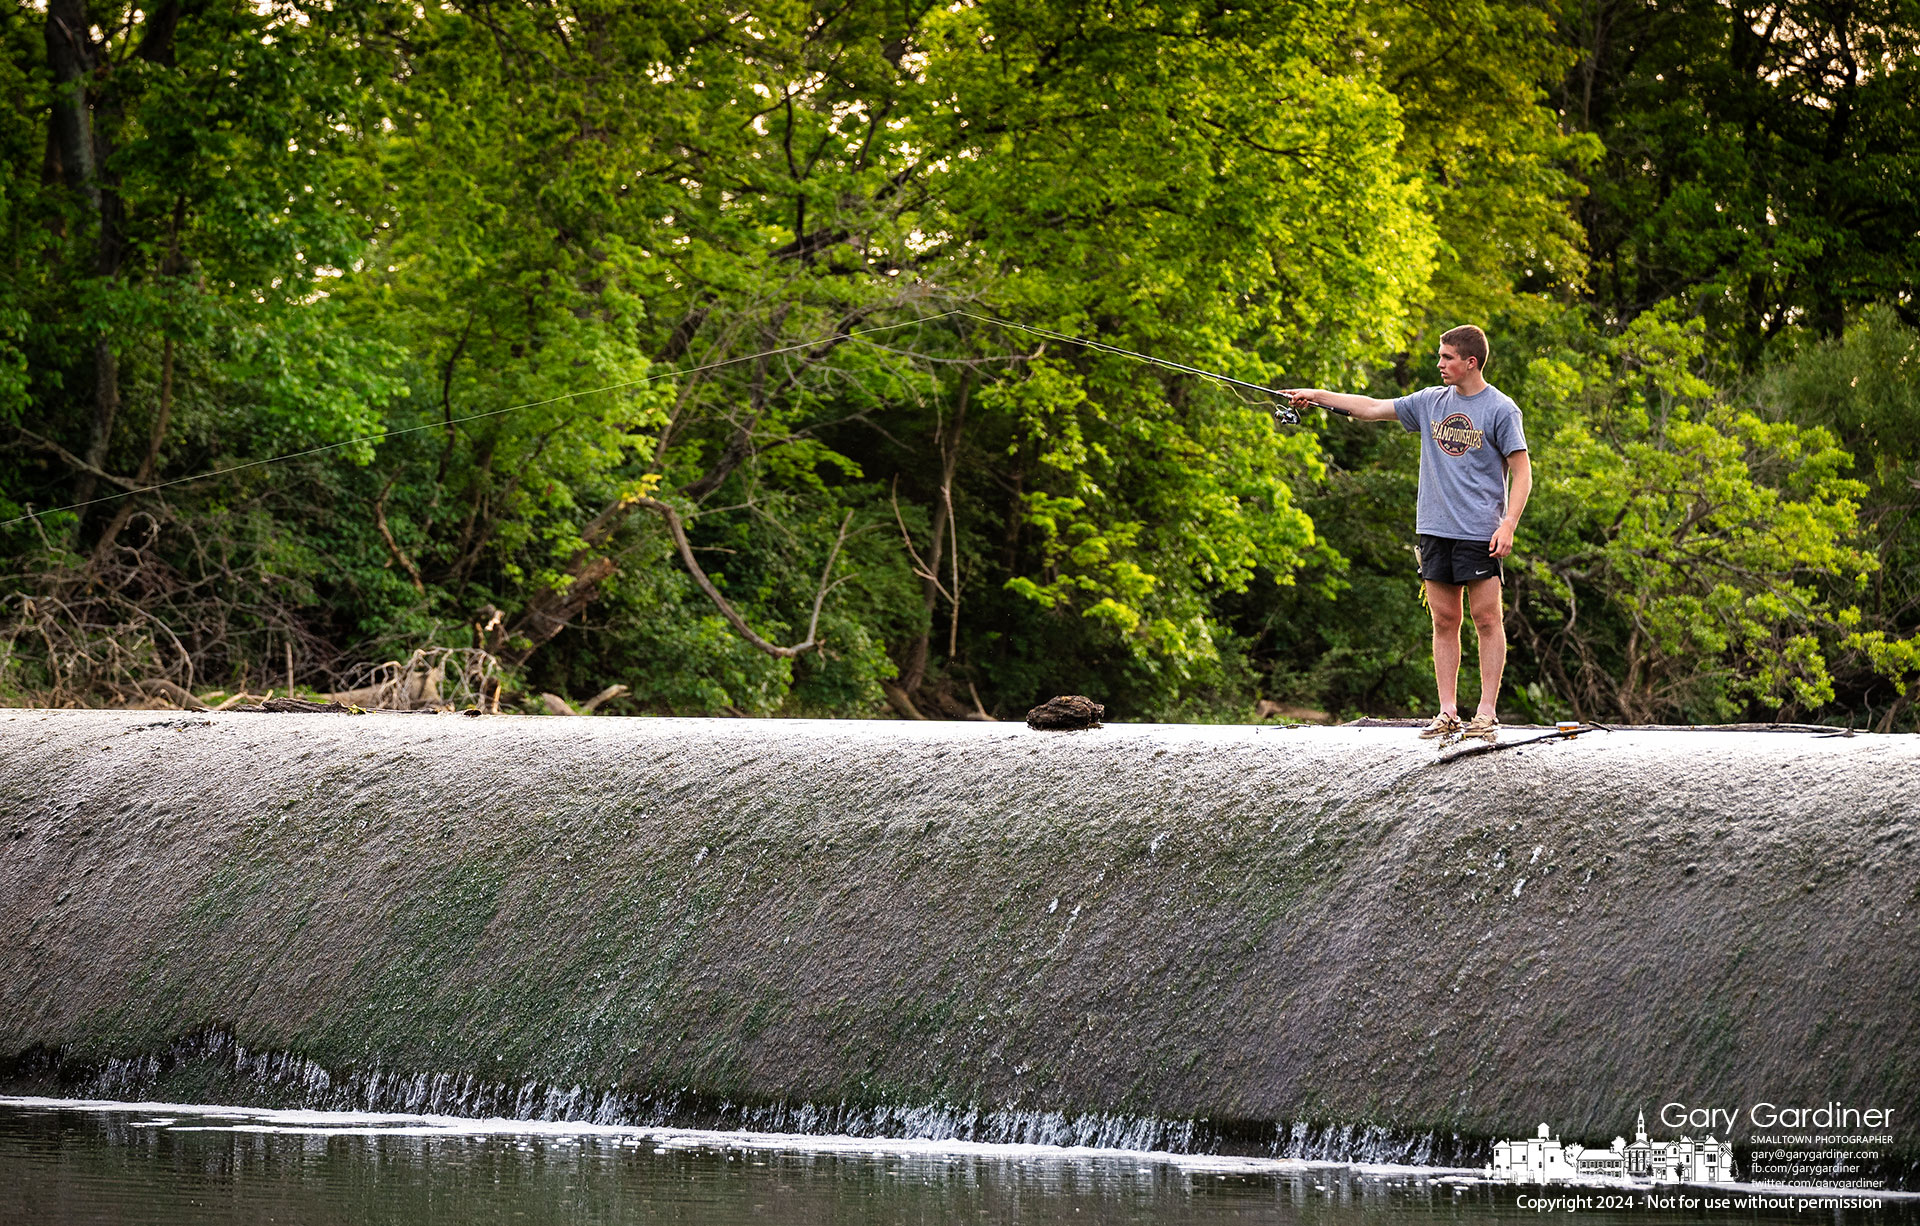 Sam Eckard casts his from atop the Alum Creek low-head dam into the pool of water below hoping his luck is better than what he had on the shoreline. My Final Photo for May 31, 2024.